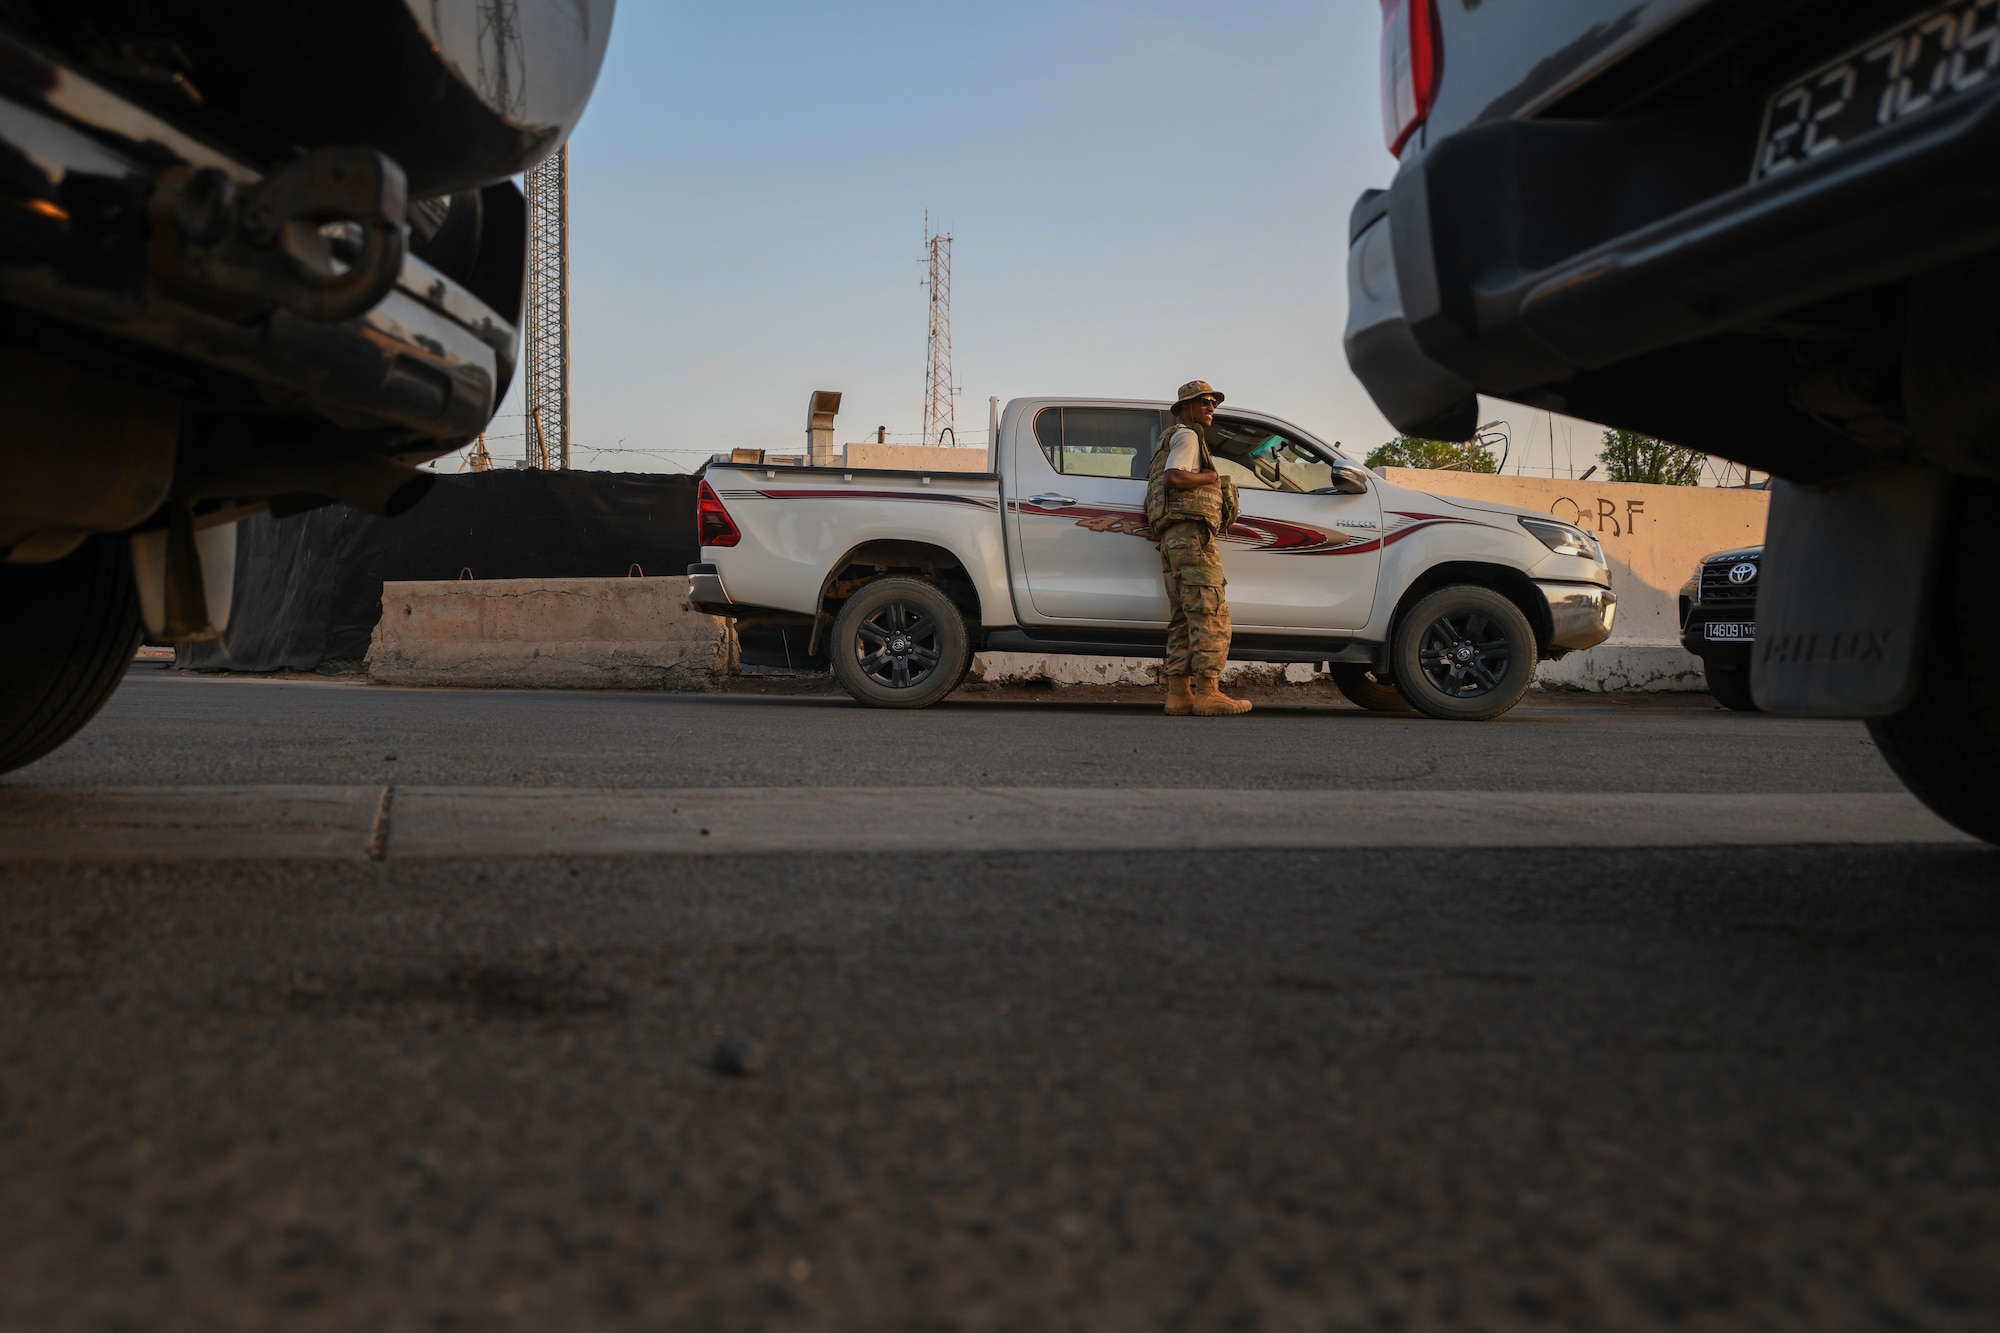 U.S. Air Force Senior Airman Erek Bowens, 776th Expeditionary Air Base Squadron heavy equipment operator, waits for a convoy to Chabelley Airfield from Camp Lemonnier Djibouti, Dec. 8, 2021. Bowen’s mission at Chabelley Airfield is to support base infrastructure while also ensuring an operational airfield. (U.S. Air Force photo by Senior Airman Ericka A. Woolever)